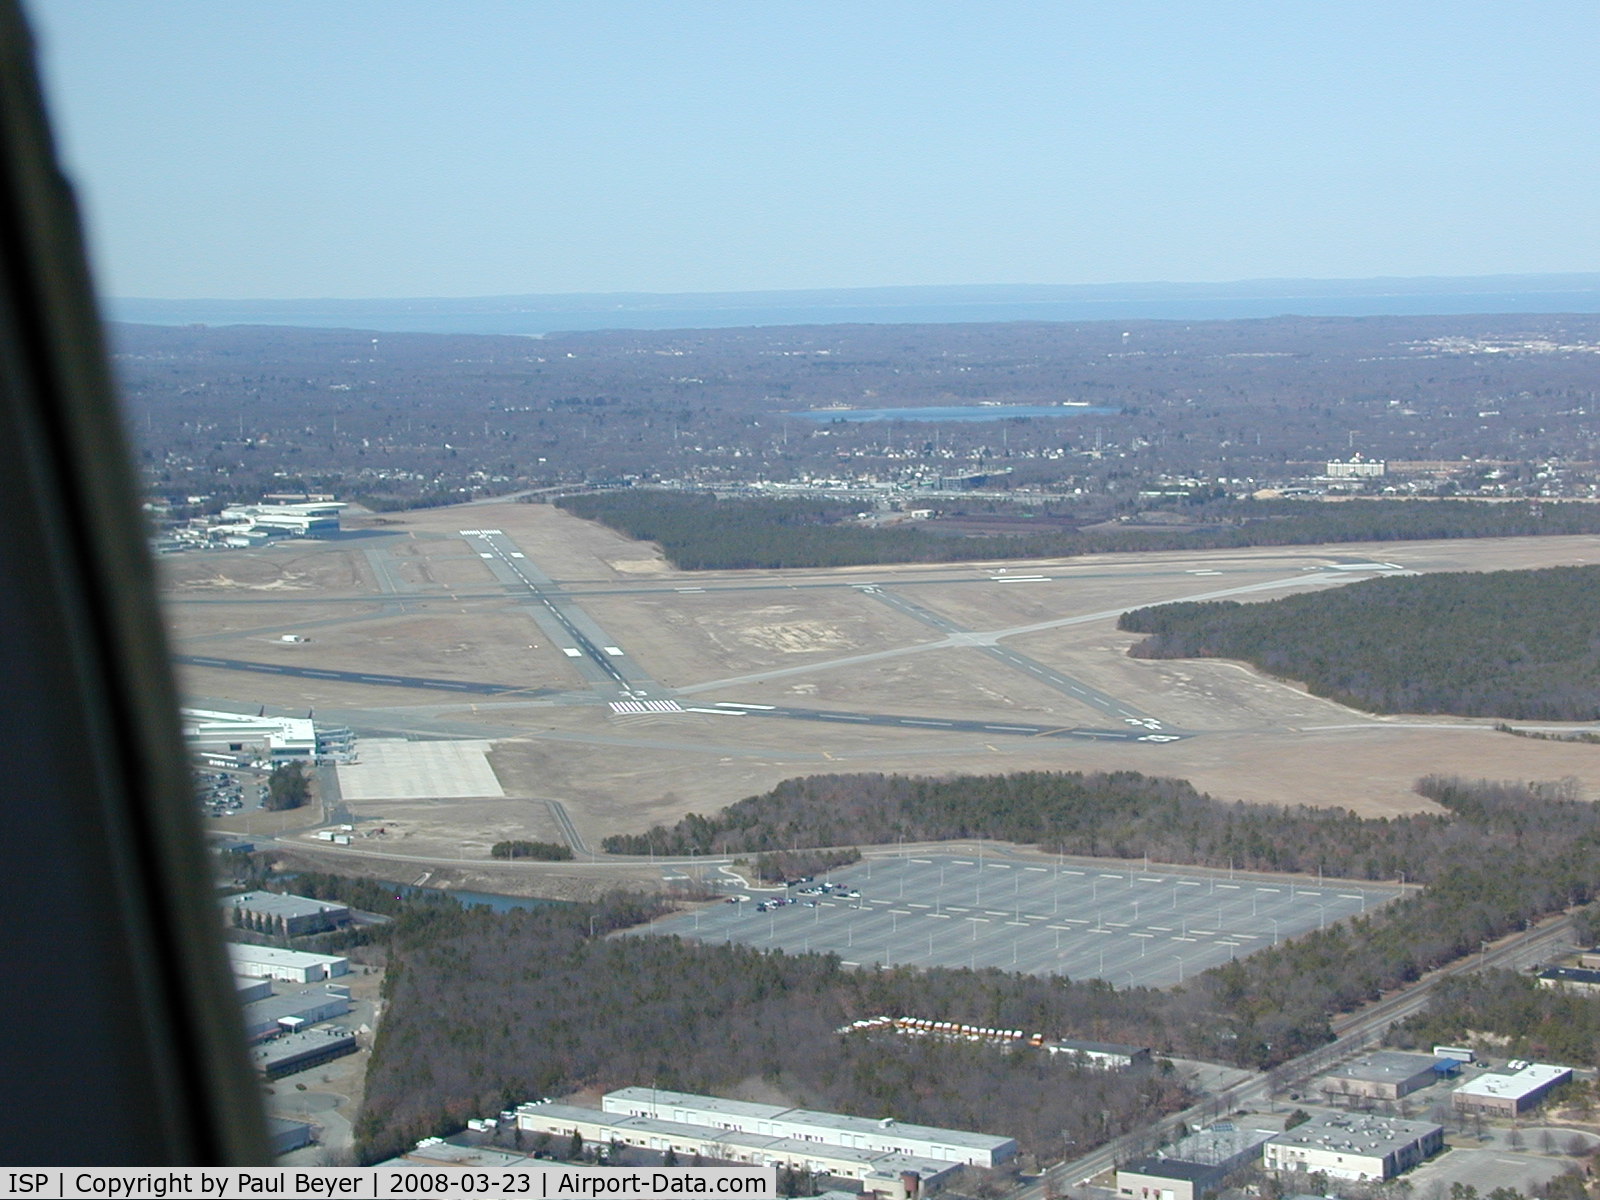 Long Island Mac Arthur Airport (ISP) - Landing at Islip on a clear March morning.